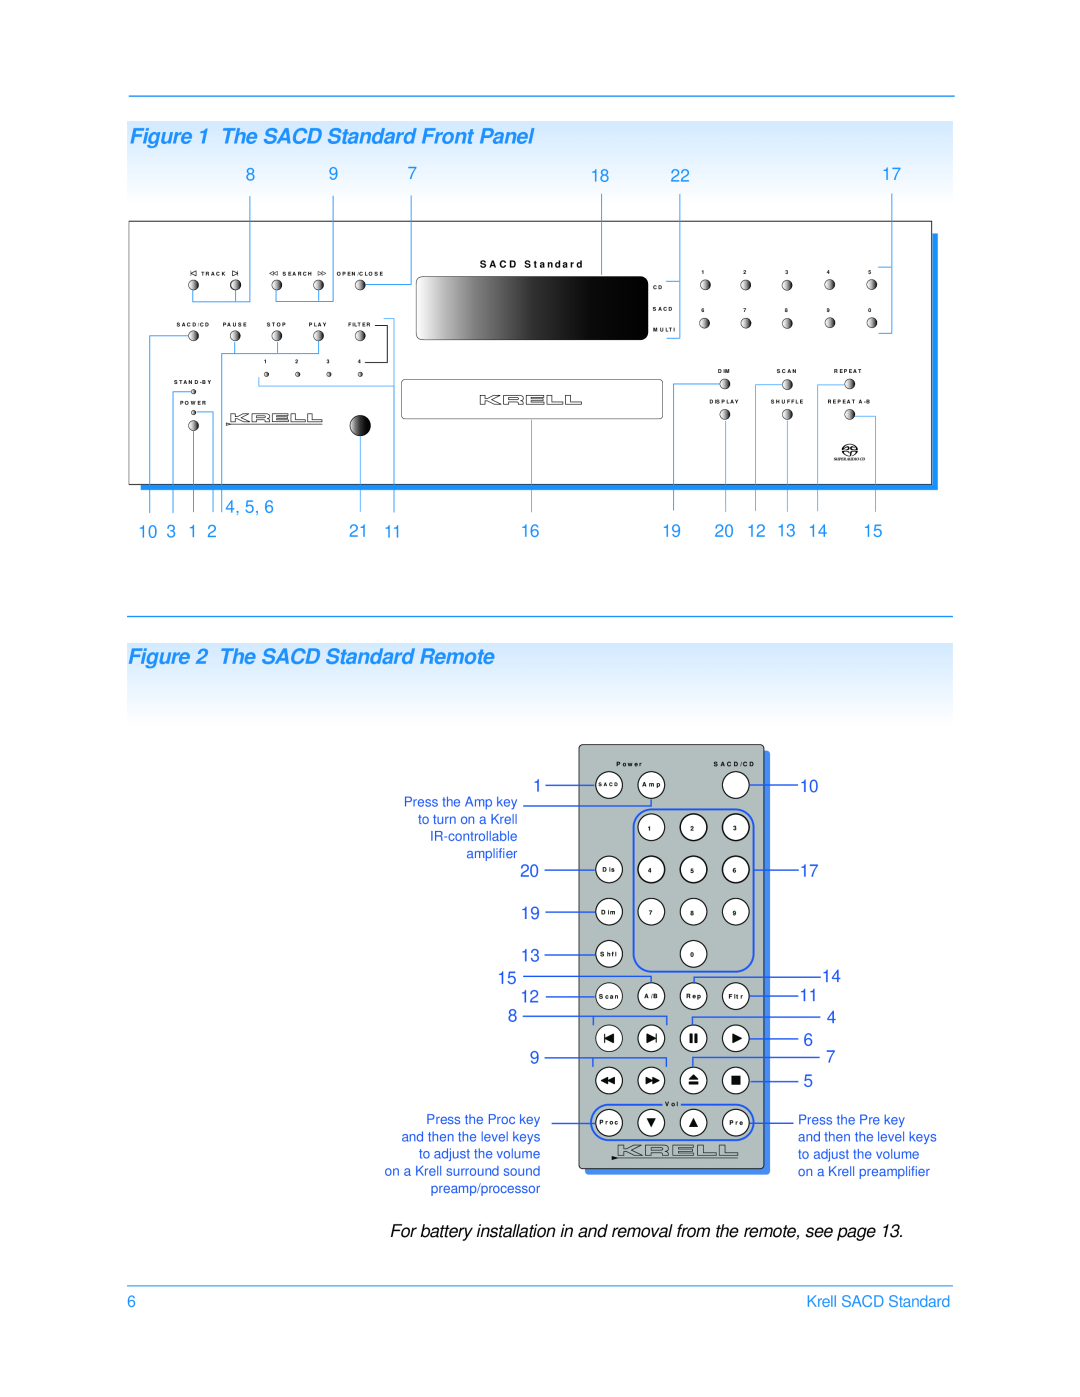 Krell Industries CD Player manual The SACD Standard Front Panel, The SACD Standard Remote, 20 19 13 